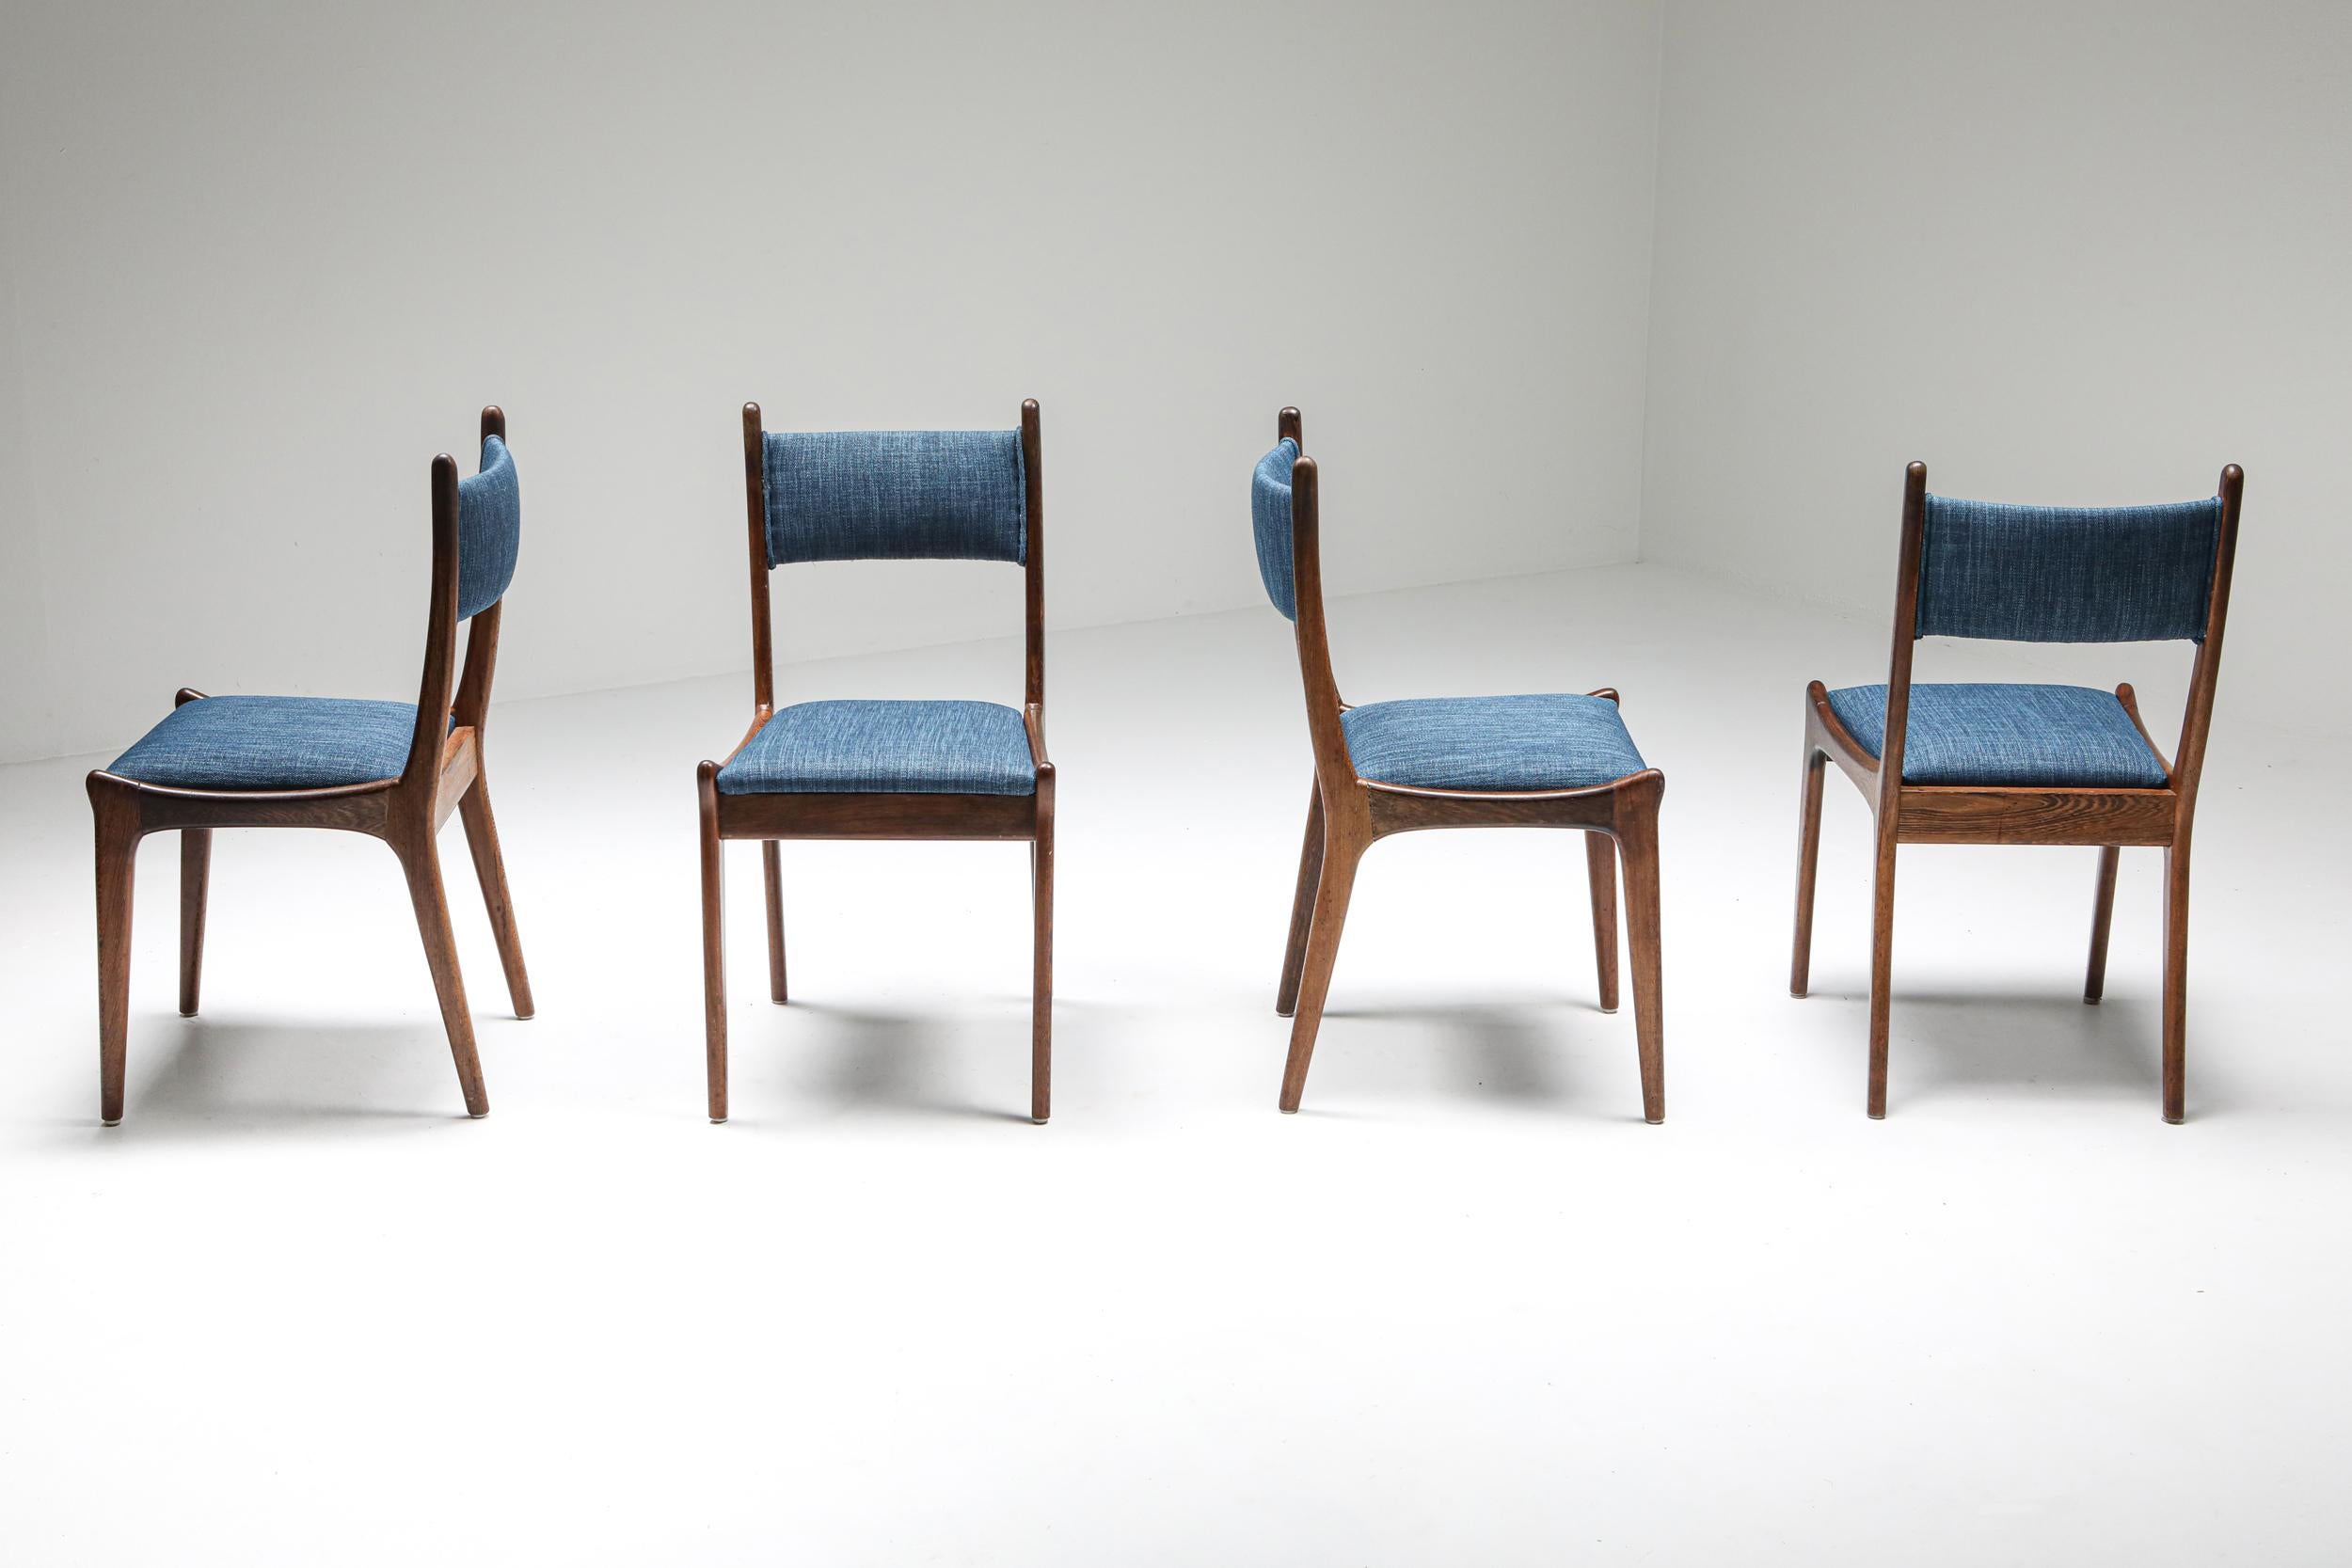 Belgian design; B&B Italia Antonio Citterio Rivadossi Marzio Cecchi Boston Mangiarotti 

A mid-century set of eight colorful dining chairs was designed by an unknown Belgian designer in the 1950s. The vibrant blue fabric and organic wooden frame